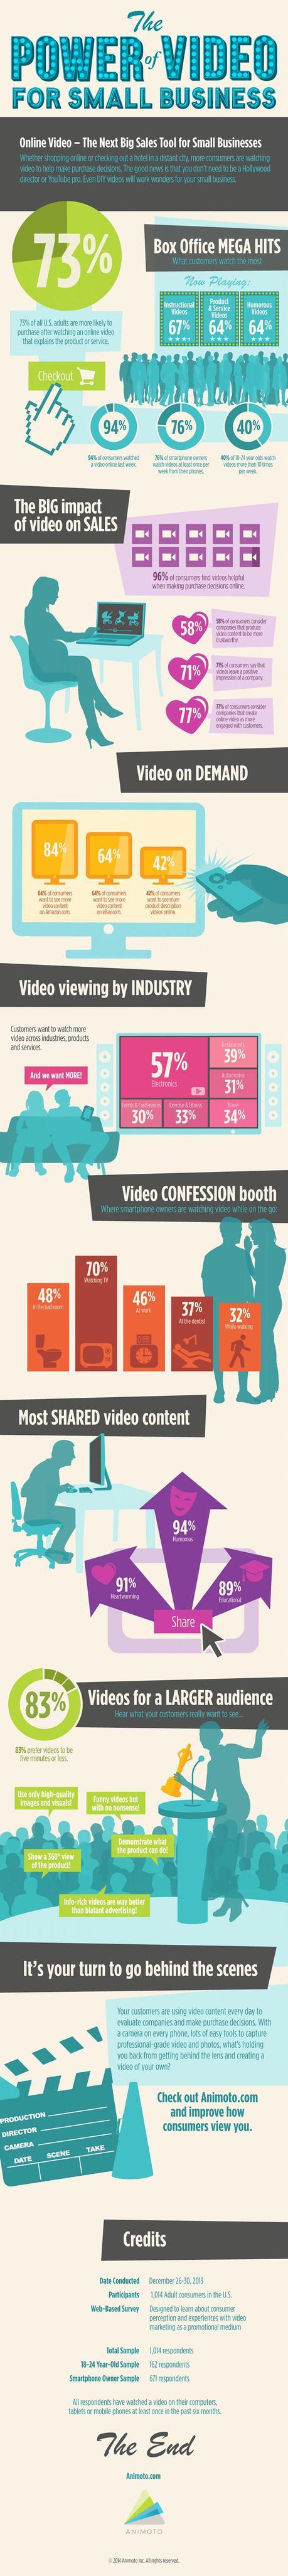 Small Business Video infographic